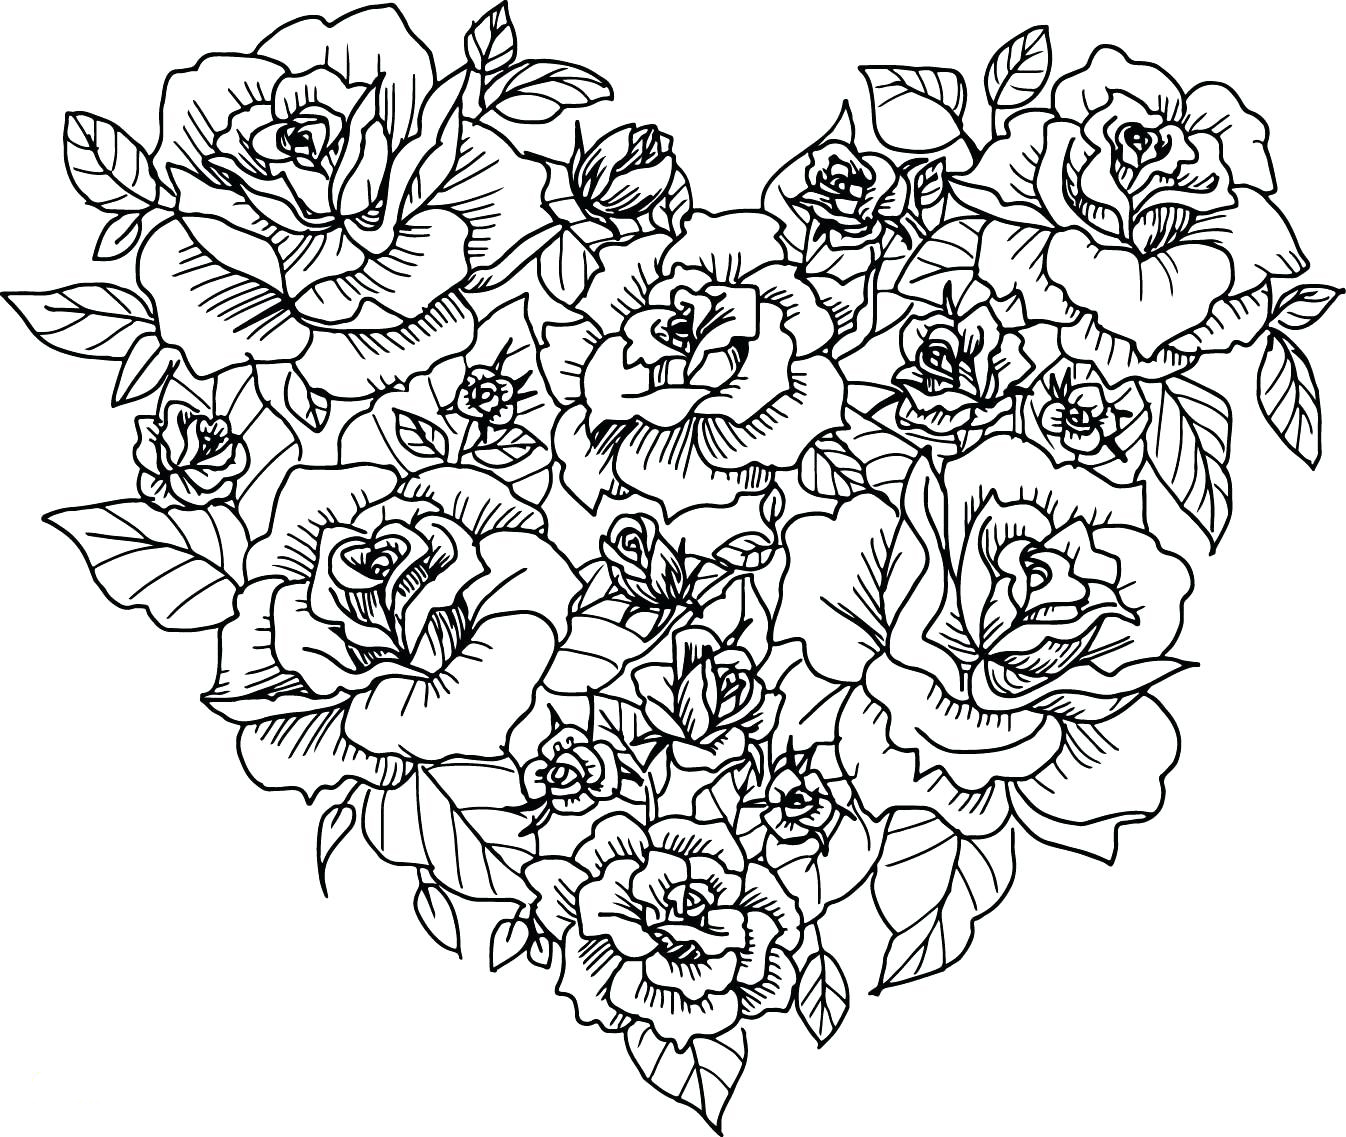 free-printable-heart-coloring-pages-for-kids